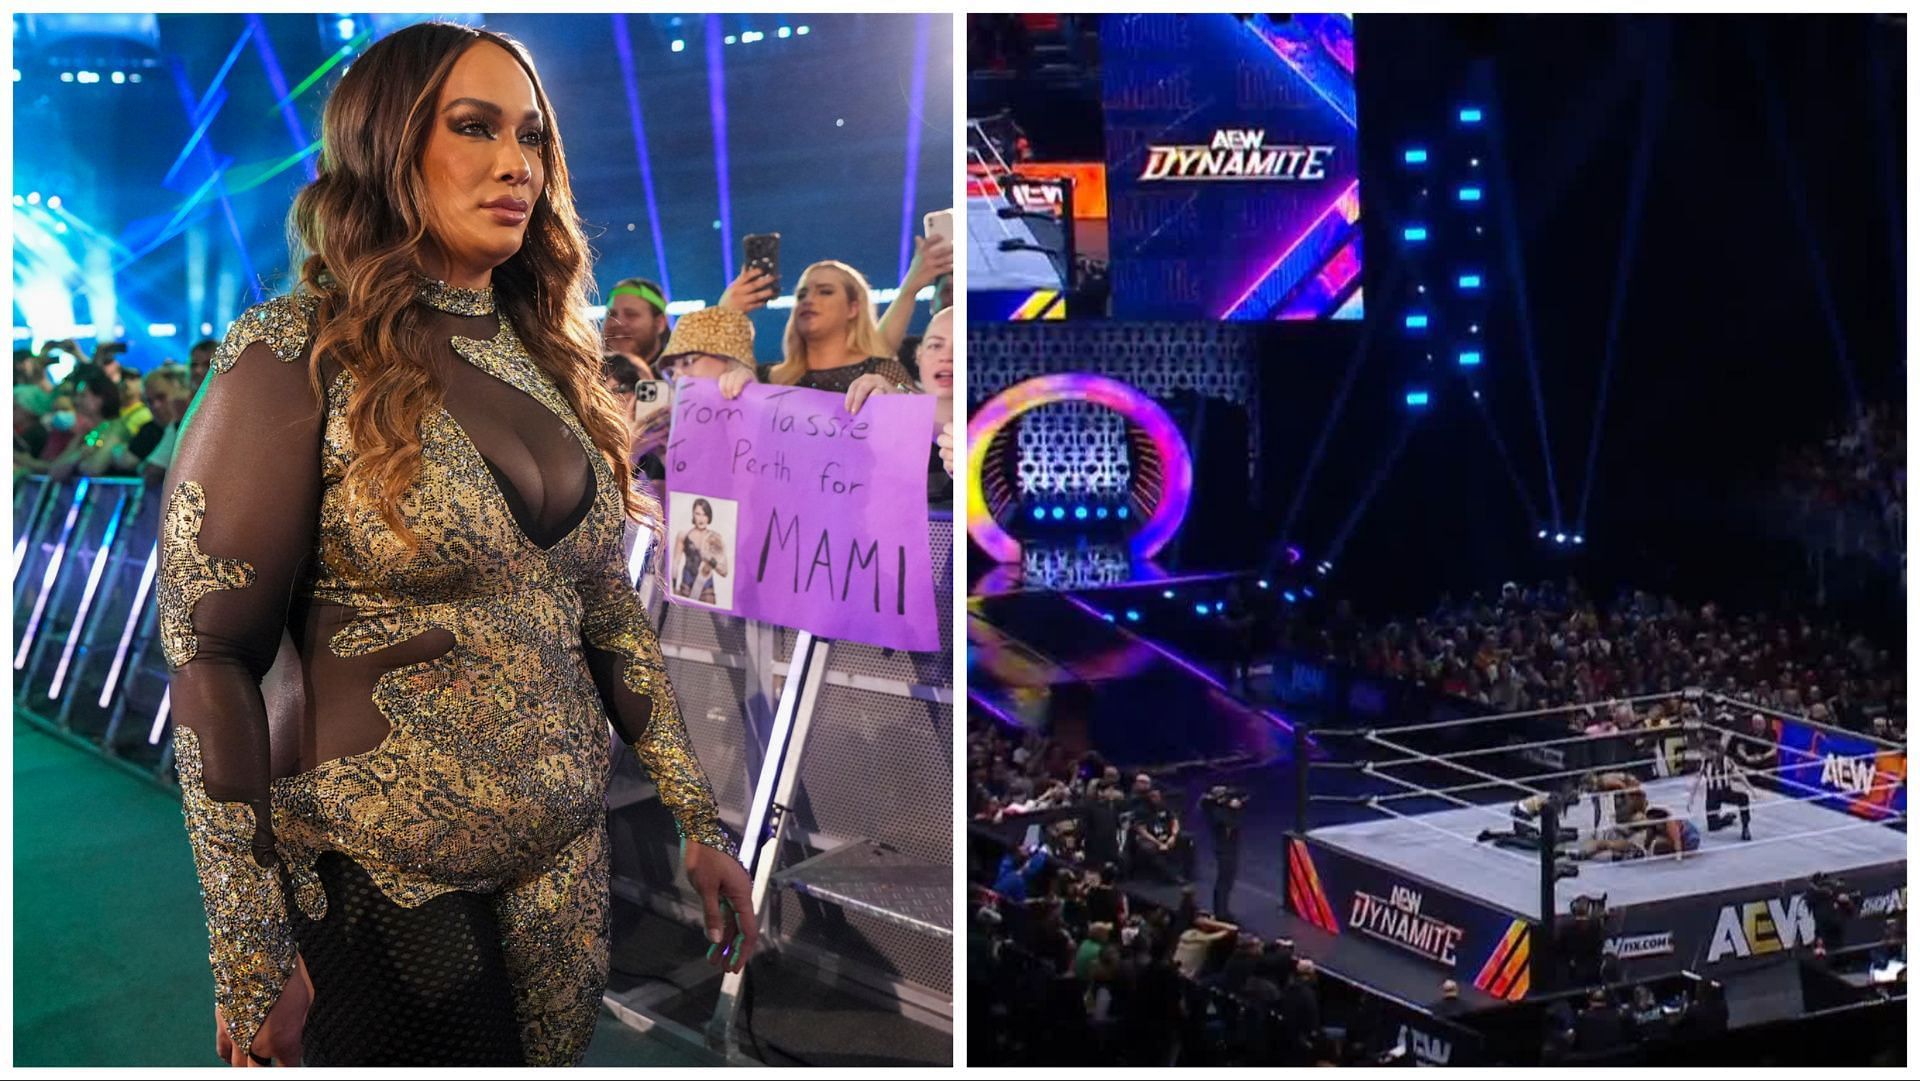 Nia Jax at WWE Elimination Chamber, fans pack local arena for AEW Dynamite